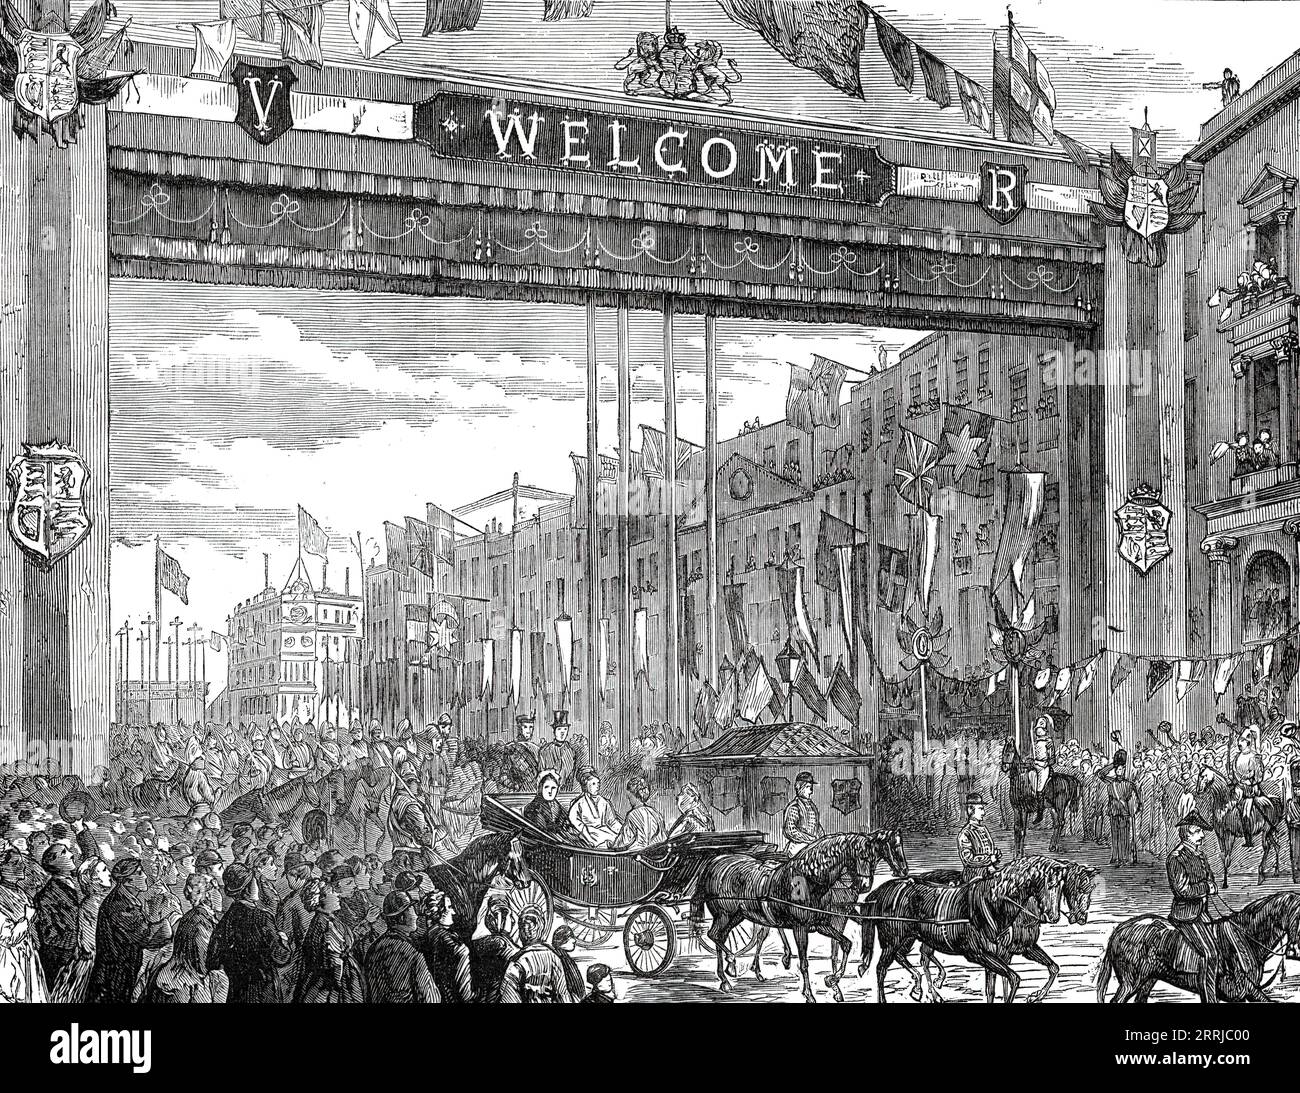 The Queen's Visit to the East End of London: Triumphal Arch in Whitechapel-Road, 1876.  'Her Majesty went...to open the new wing of the London Hospital buildings in Whitechapel-road. It was a high festival for the East End of London...At the City boundary a large triumphal arch, forty feet high, spanning the roadway, had been erected. It was handsomely decorated with flags, and bore on the Aldgate side the inscription, &quot;Welcome to our Queen&quot;...The word &quot;Welcome&quot; occurred repeatedly, sometimes with the addition of &quot;Come again,&quot; and &quot;Thanks for this visit&quot; Stock Photo